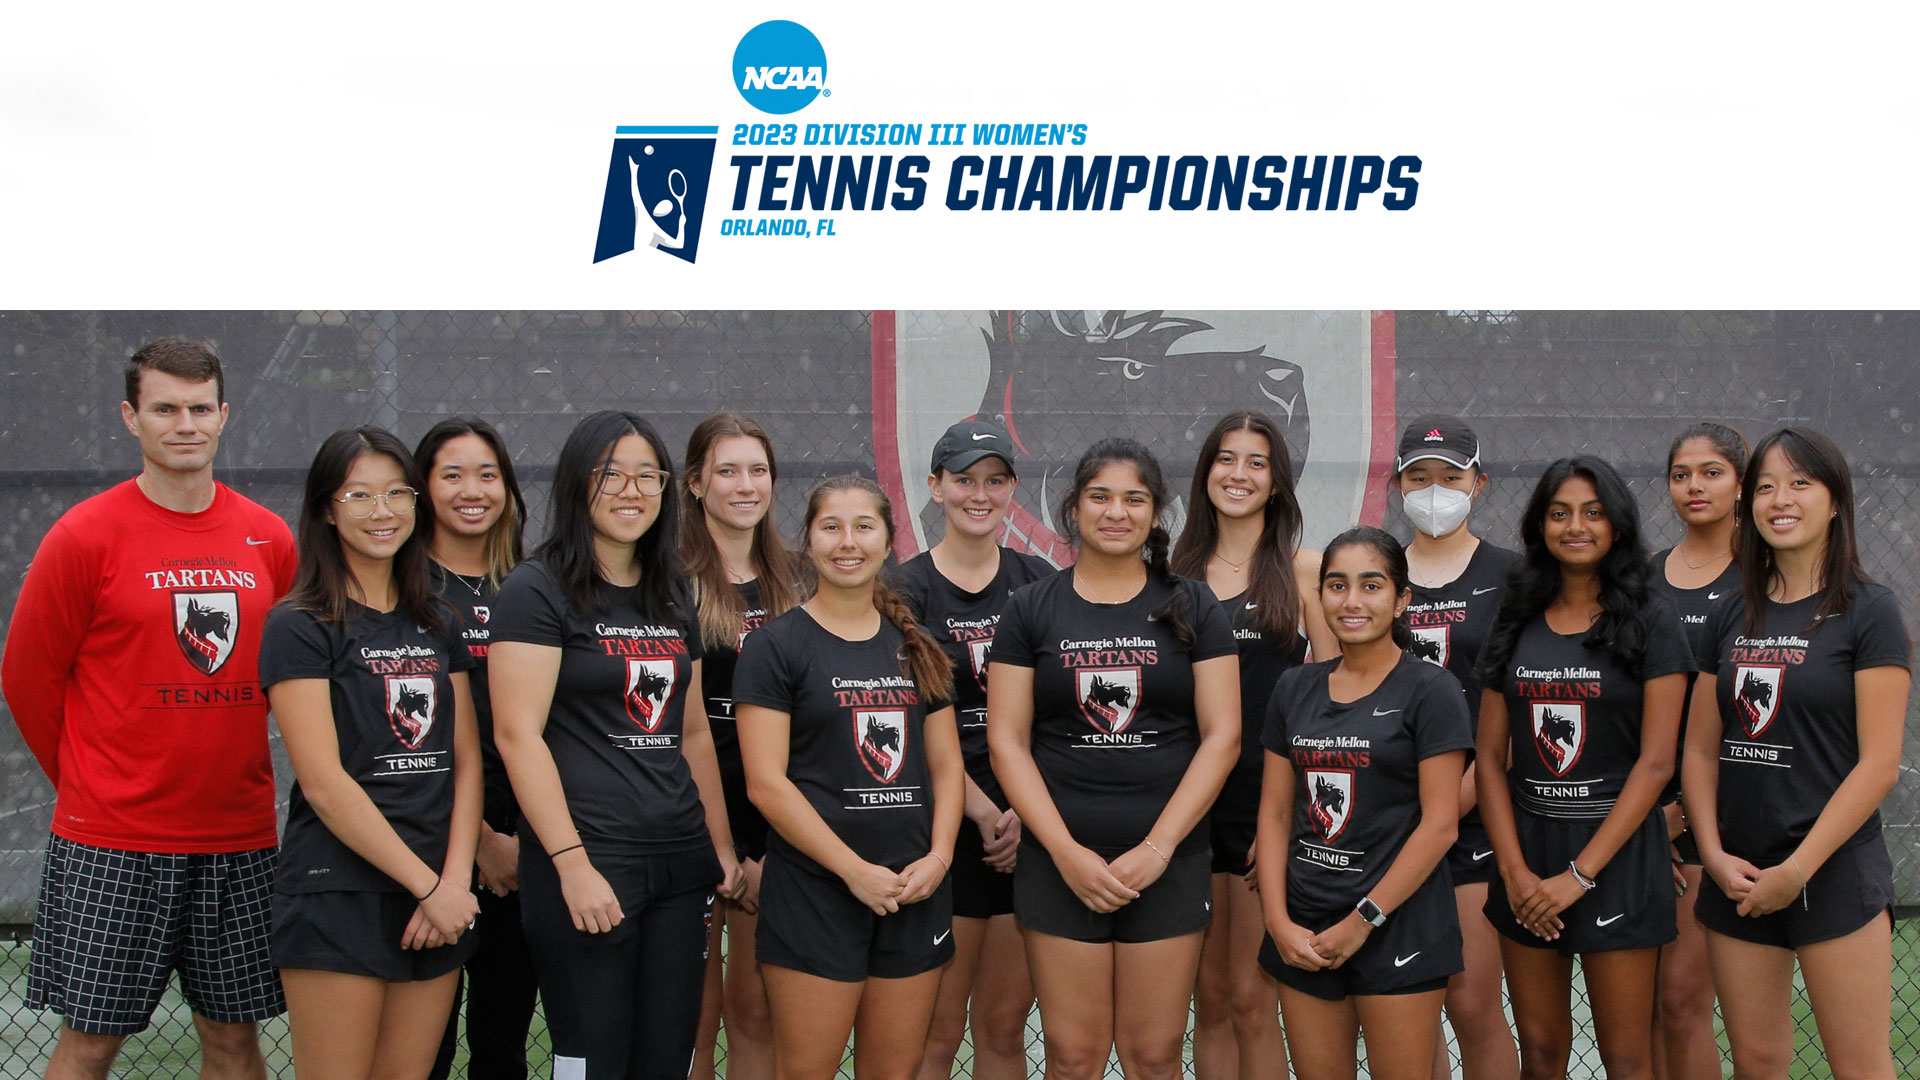 women's tennis team photo with coach on left and players in two rows - text reads NCAA DIII Women's Tennis Championships